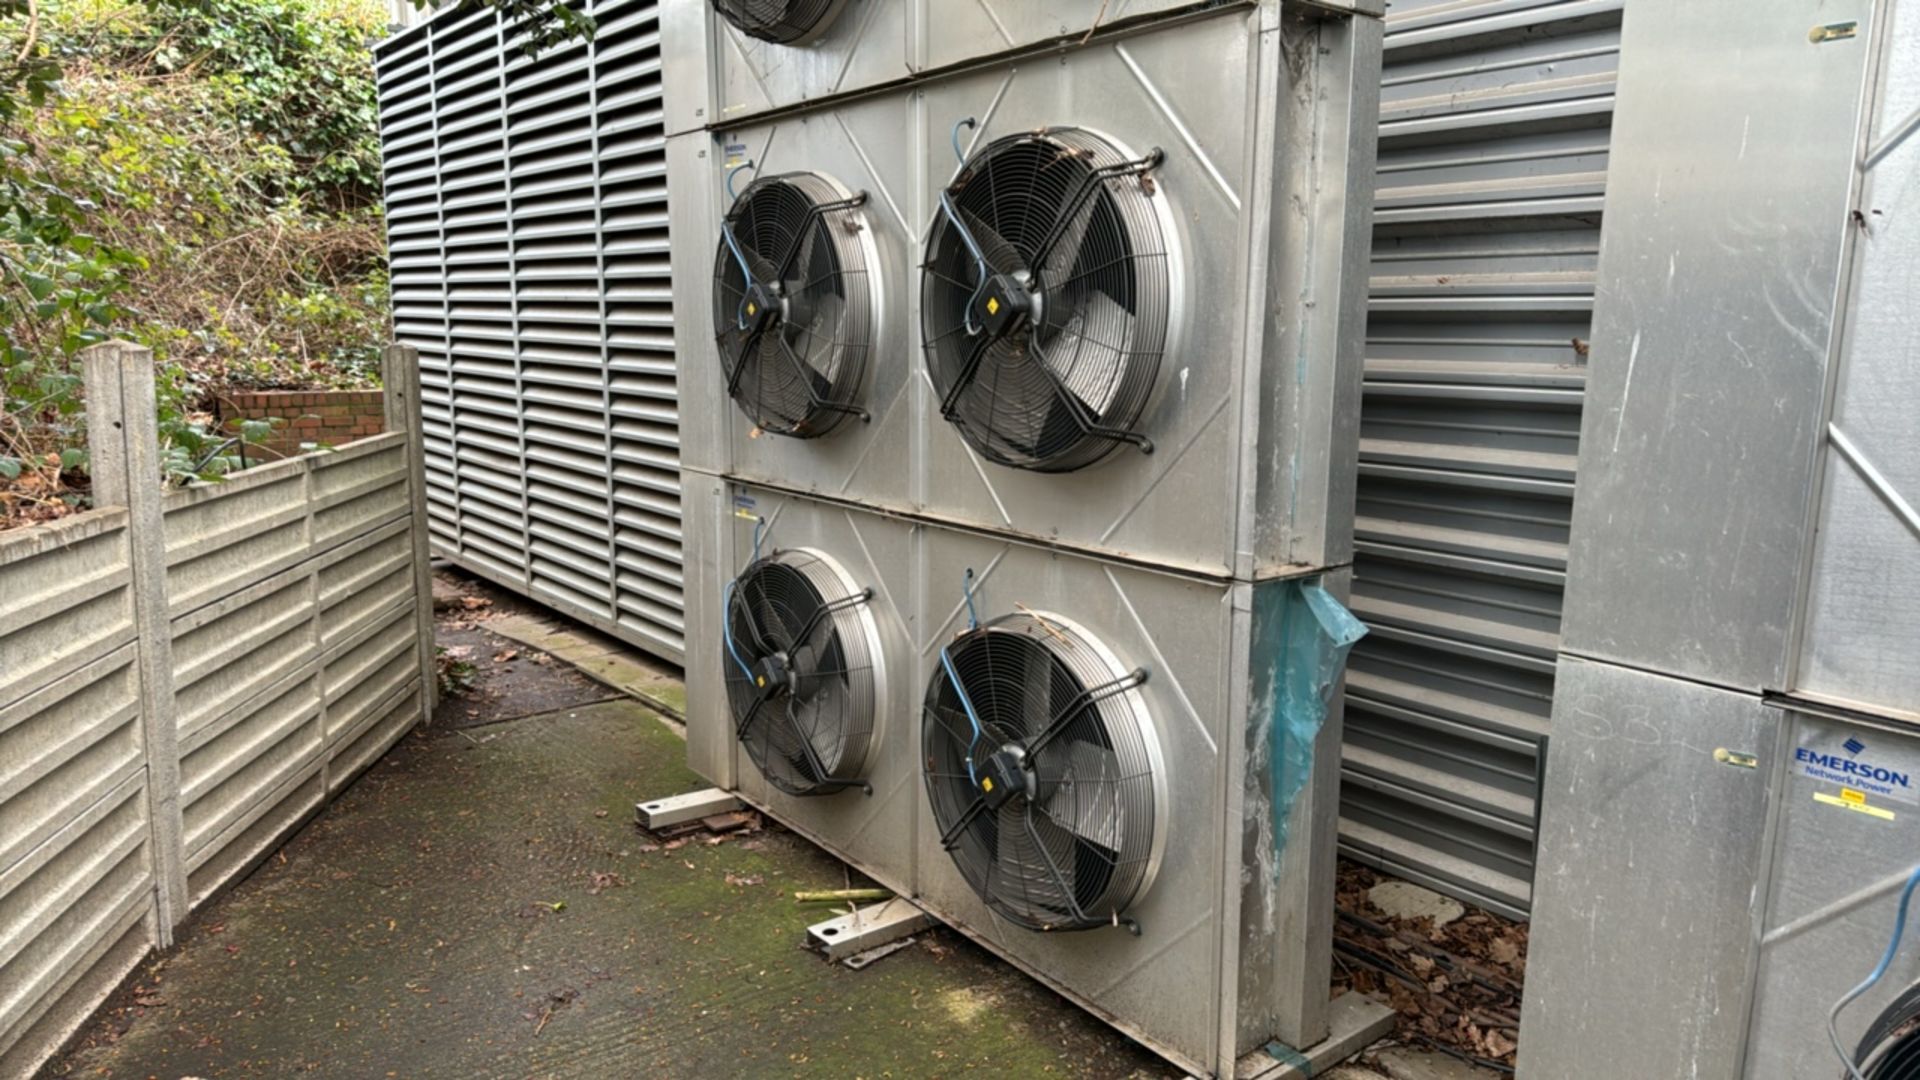 Emerson Network Power External Cooling Fans - Image 4 of 7